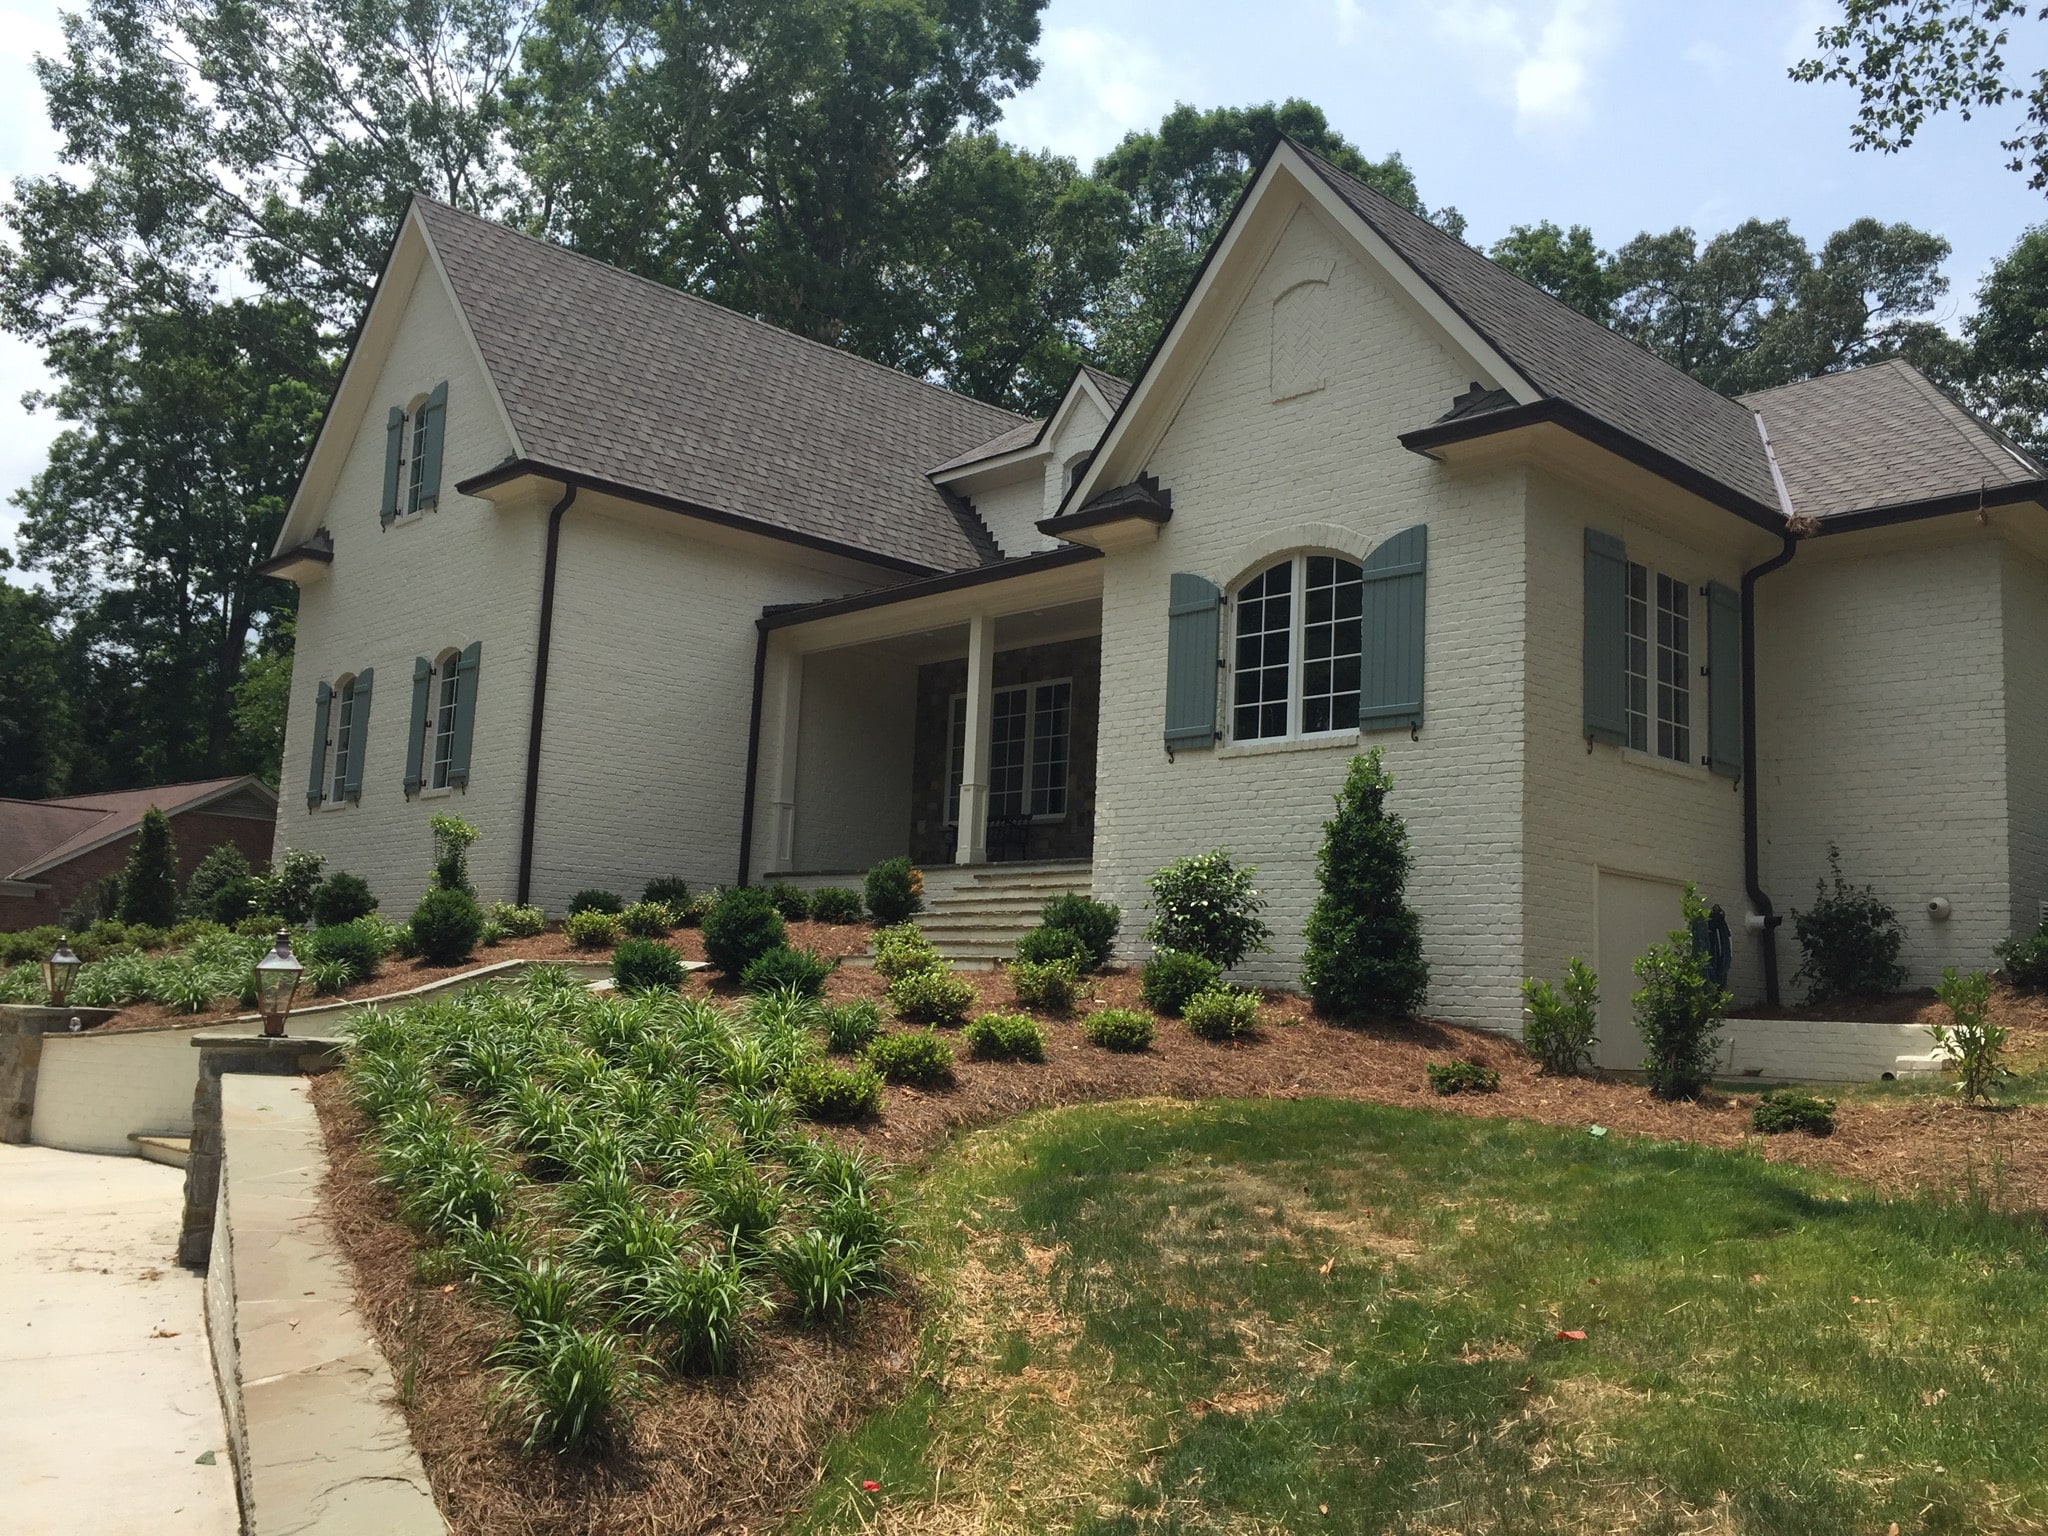 Exterior Board and Batten Composite Shutters in Mooresville, NC